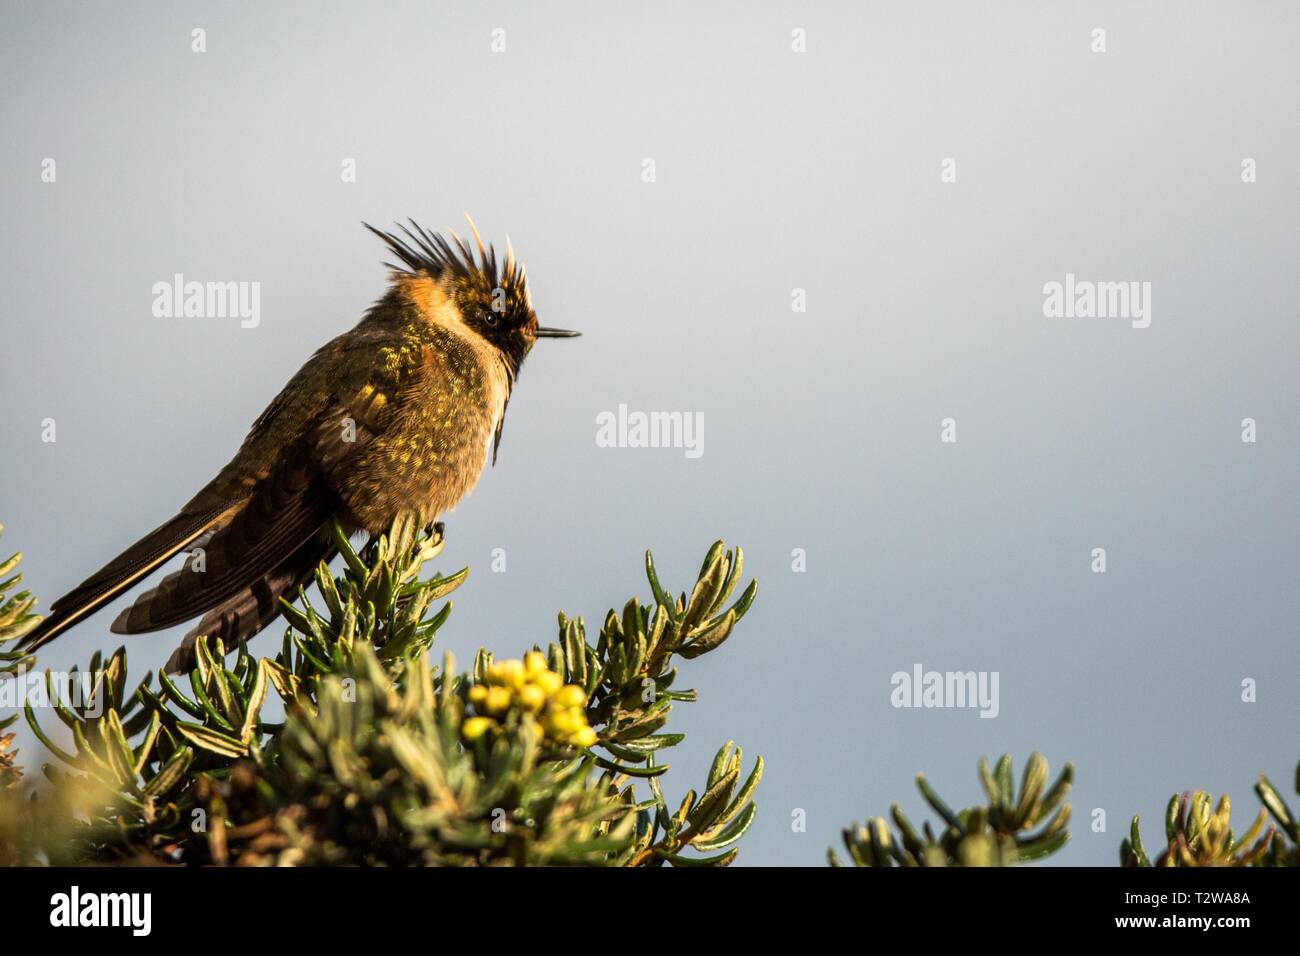 Green-bearded helmetcrest resting on tree with yellow flowers, Colombia, hummingbird sucking nectar from blossom,high altitude animal in its environme Stock Photo